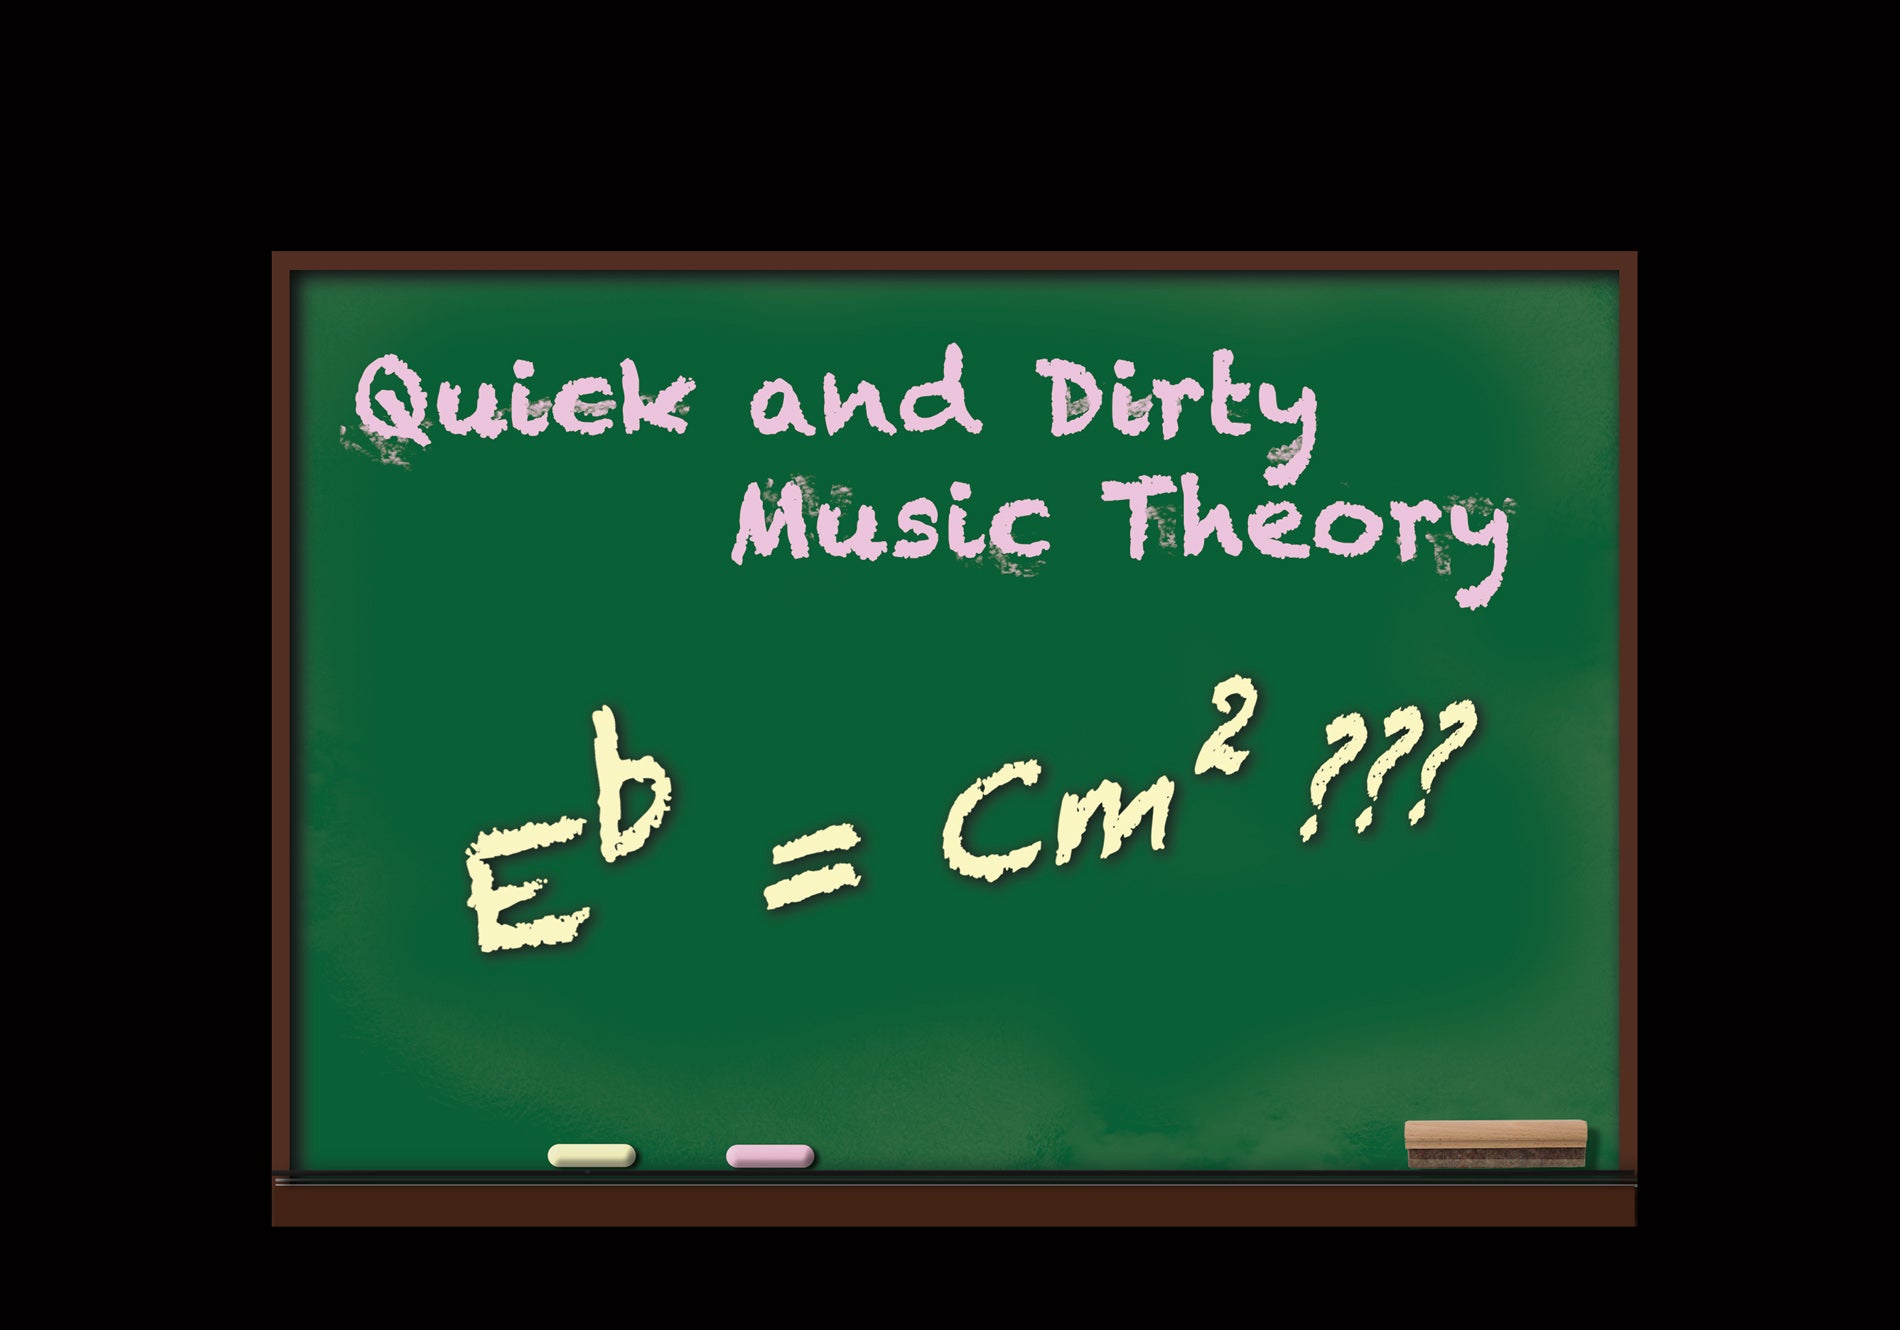 Quick and Dirty Music Theory